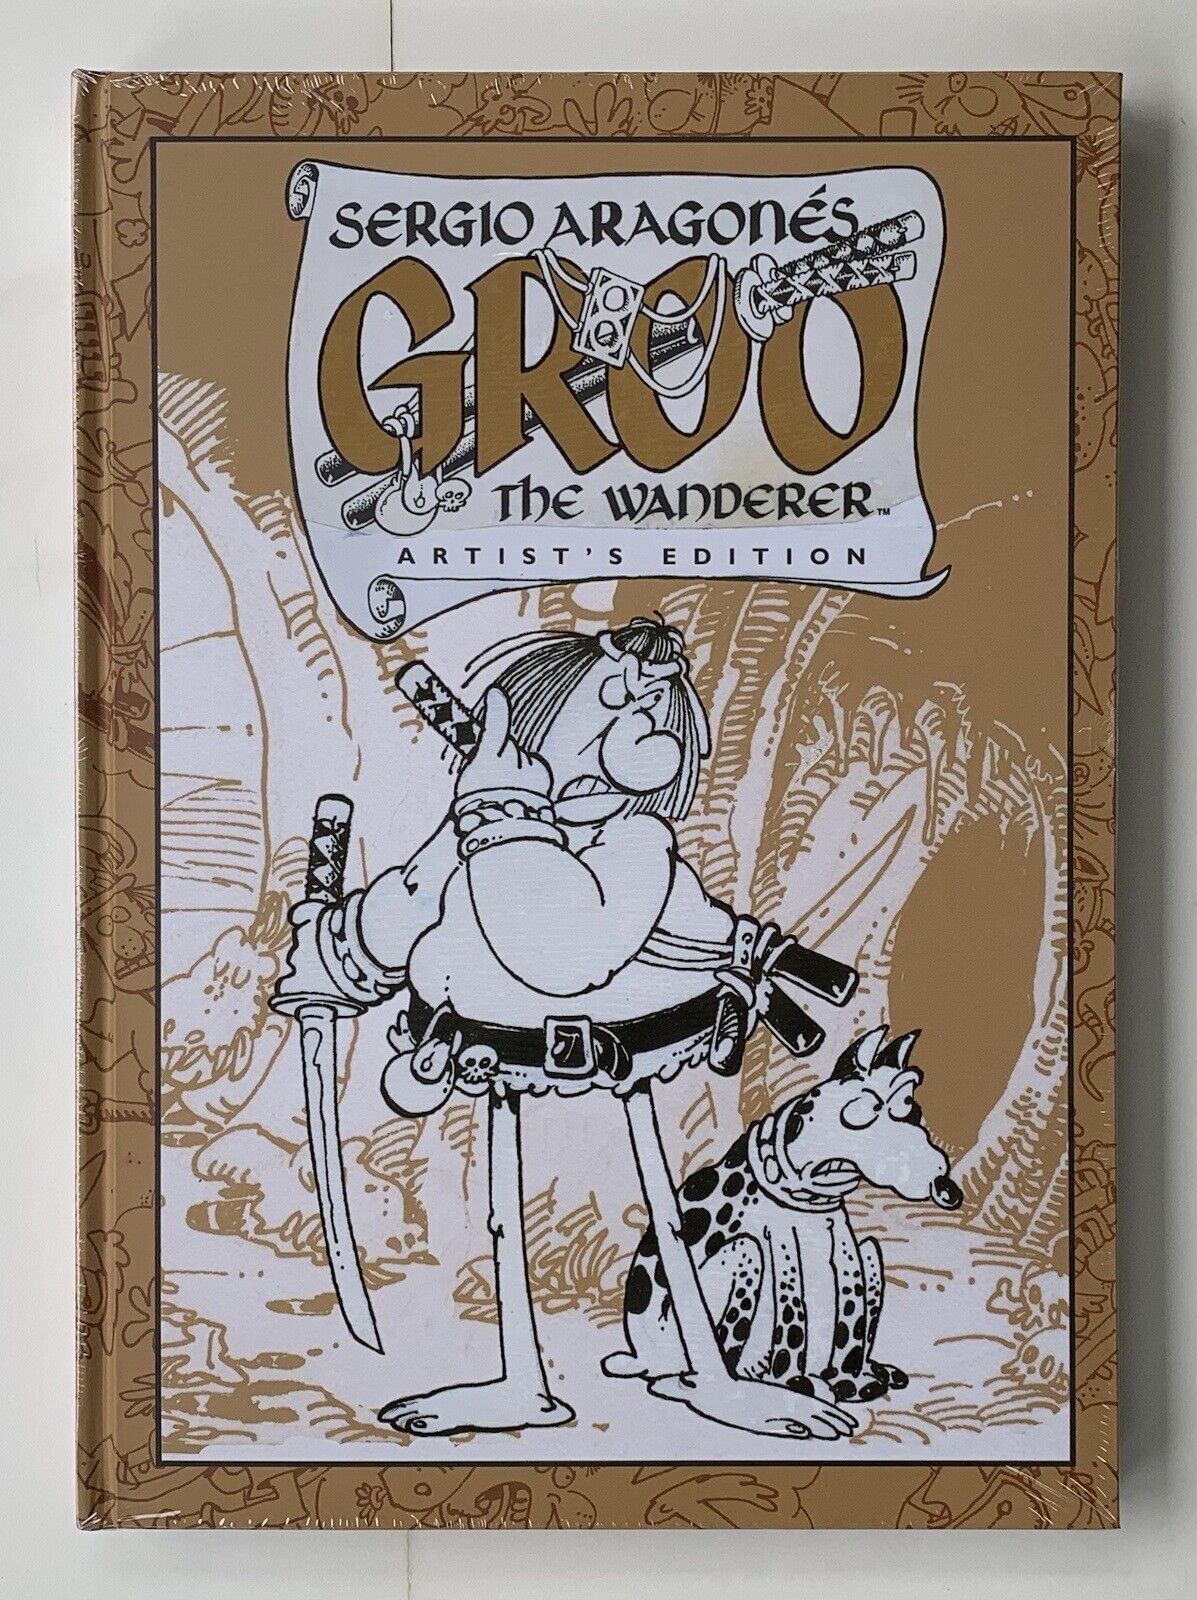 Sergio Aragones Groo The Wanderer Artist’s Edition Signed New & Sealed HC IDW